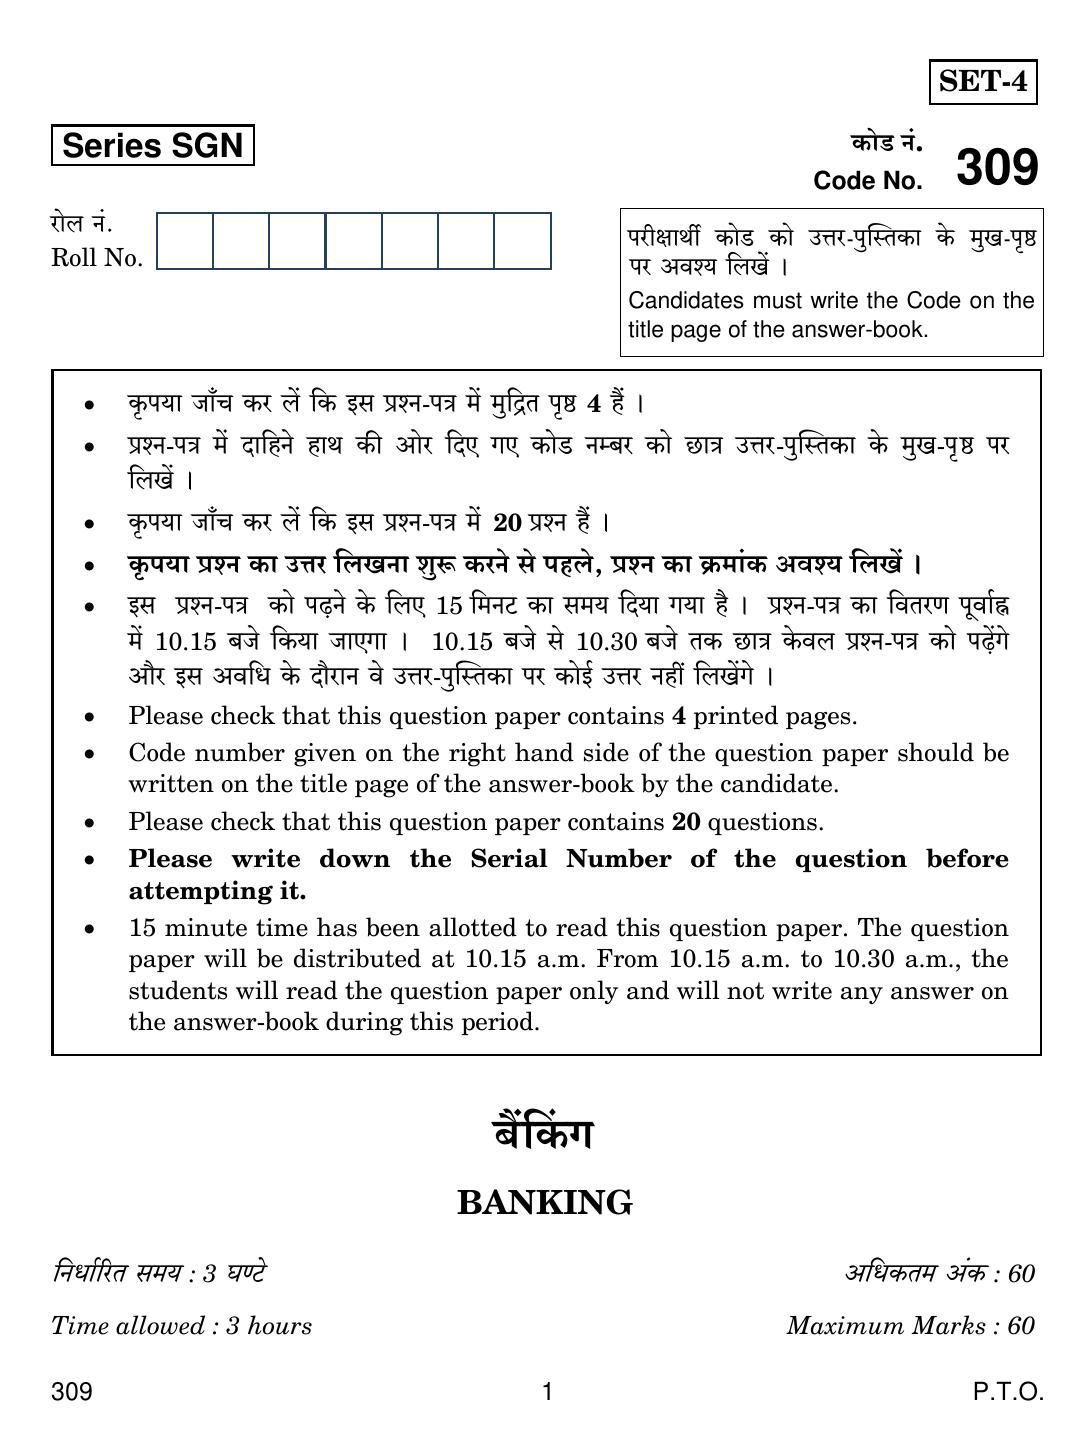 CBSE Class 12 309 BANKING 2018 Question Paper - Page 1